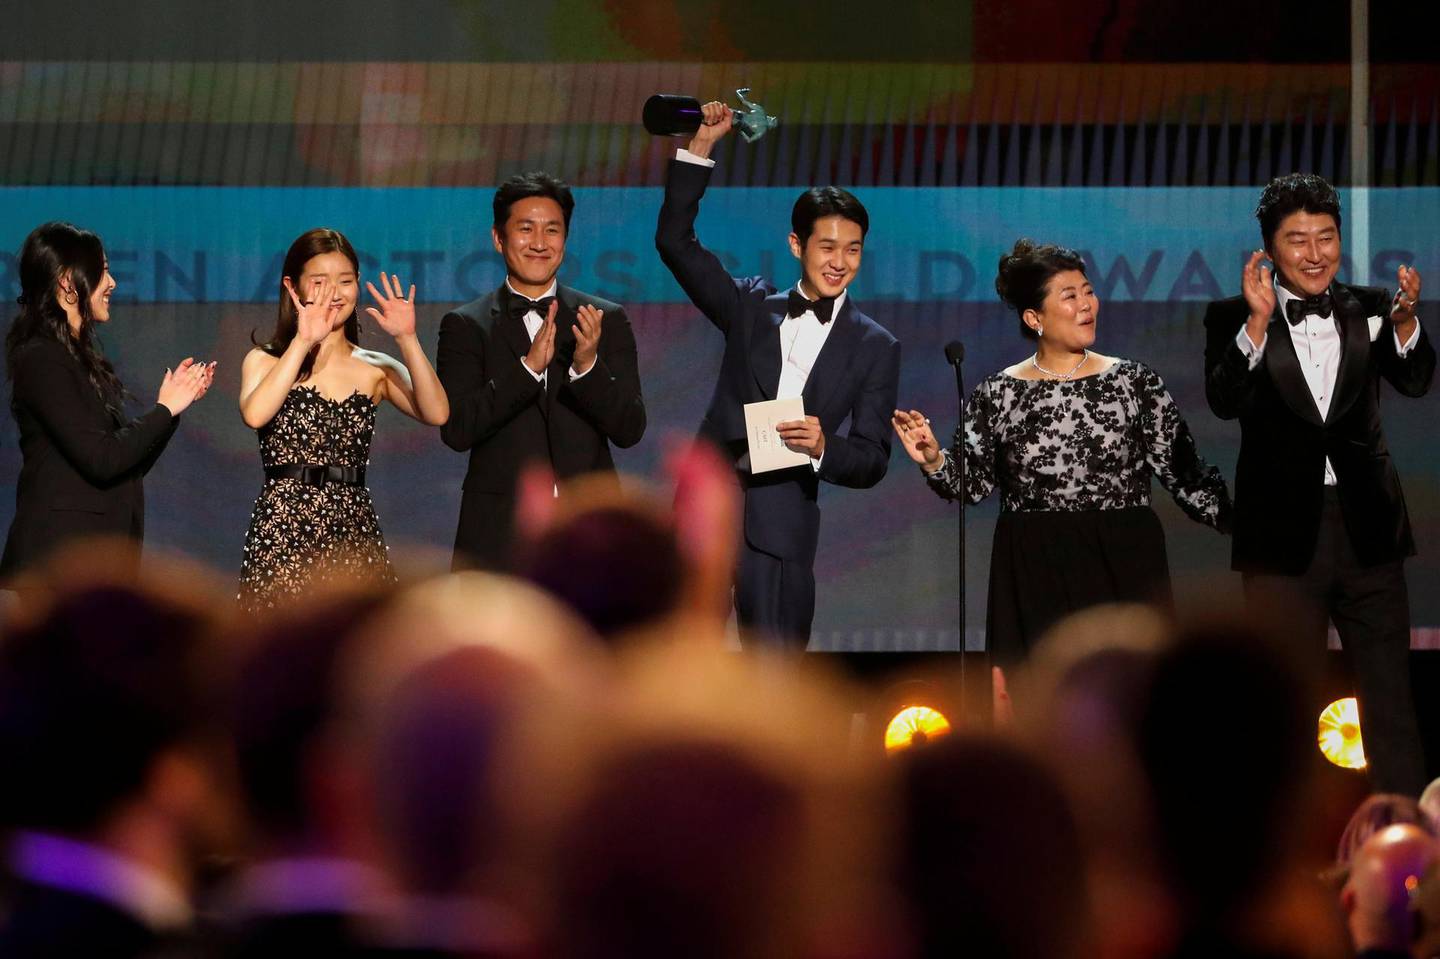 26th Screen Actors Guild Awards - Show - Los Angeles, California, U.S., January 19, 2020 - The cast of "Parasite" accepts the award for Outstanding Performance by a Cast in a Motion Picture. REUTERS/Mario Anzuoni     TPX IMAGES OF THE DAY